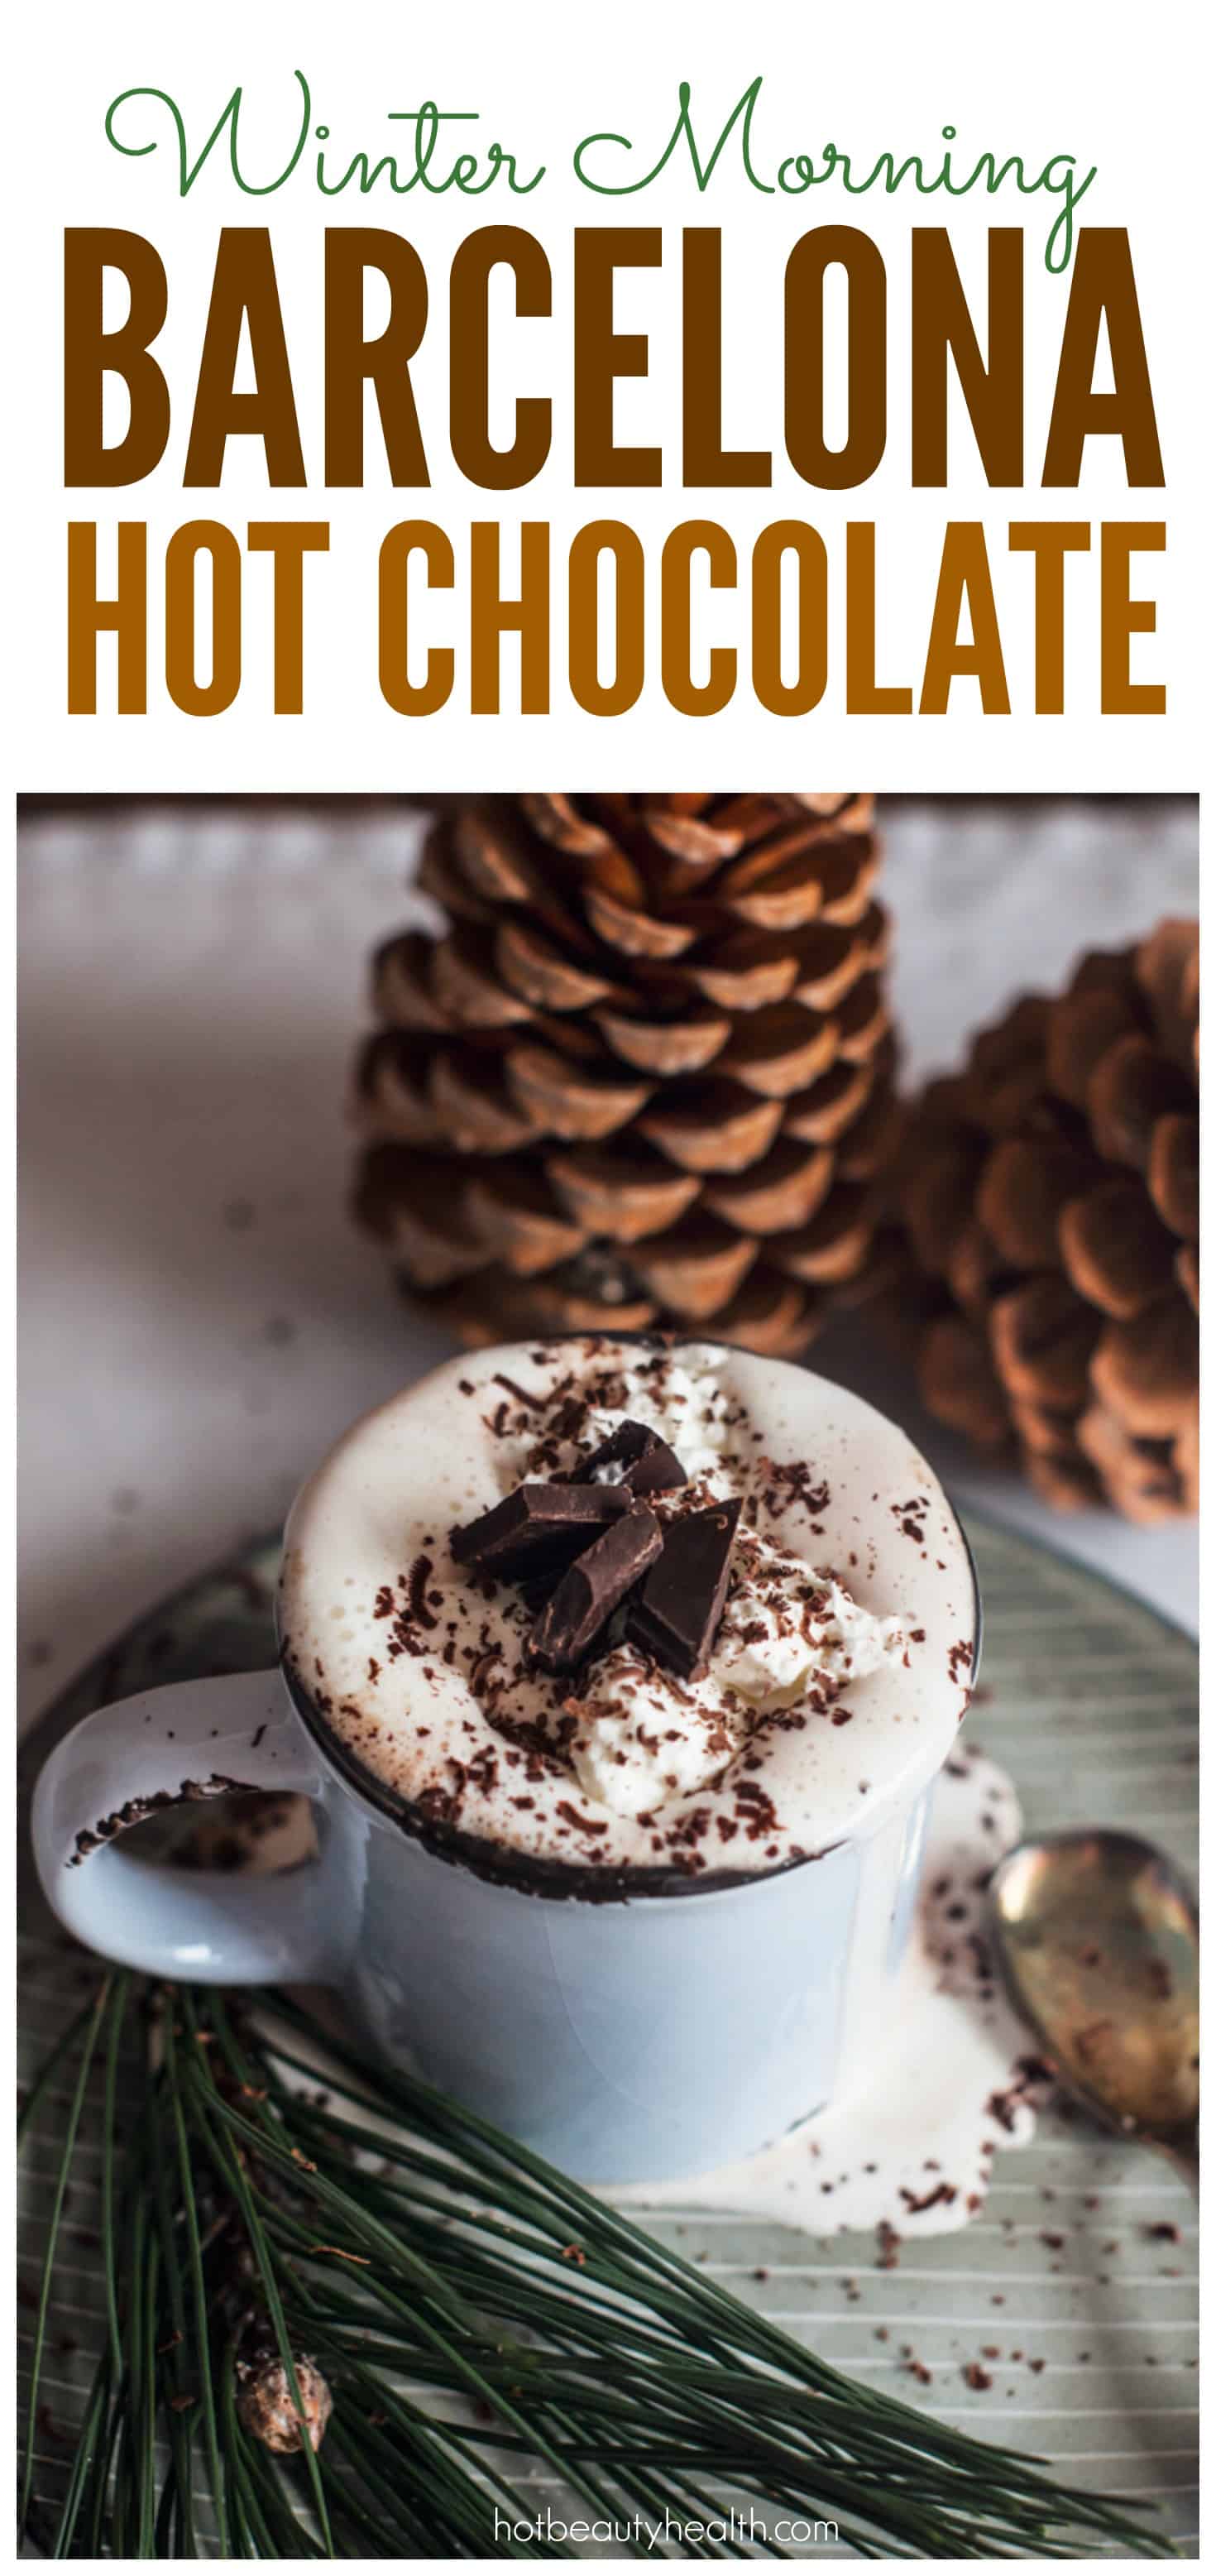 Looking for warm winter morning drink ideas? This Barcelona Hot Chocolate recipe is so simple and delicious, and will keep you and the whole family cozy this cold season. Click here for the recipe!